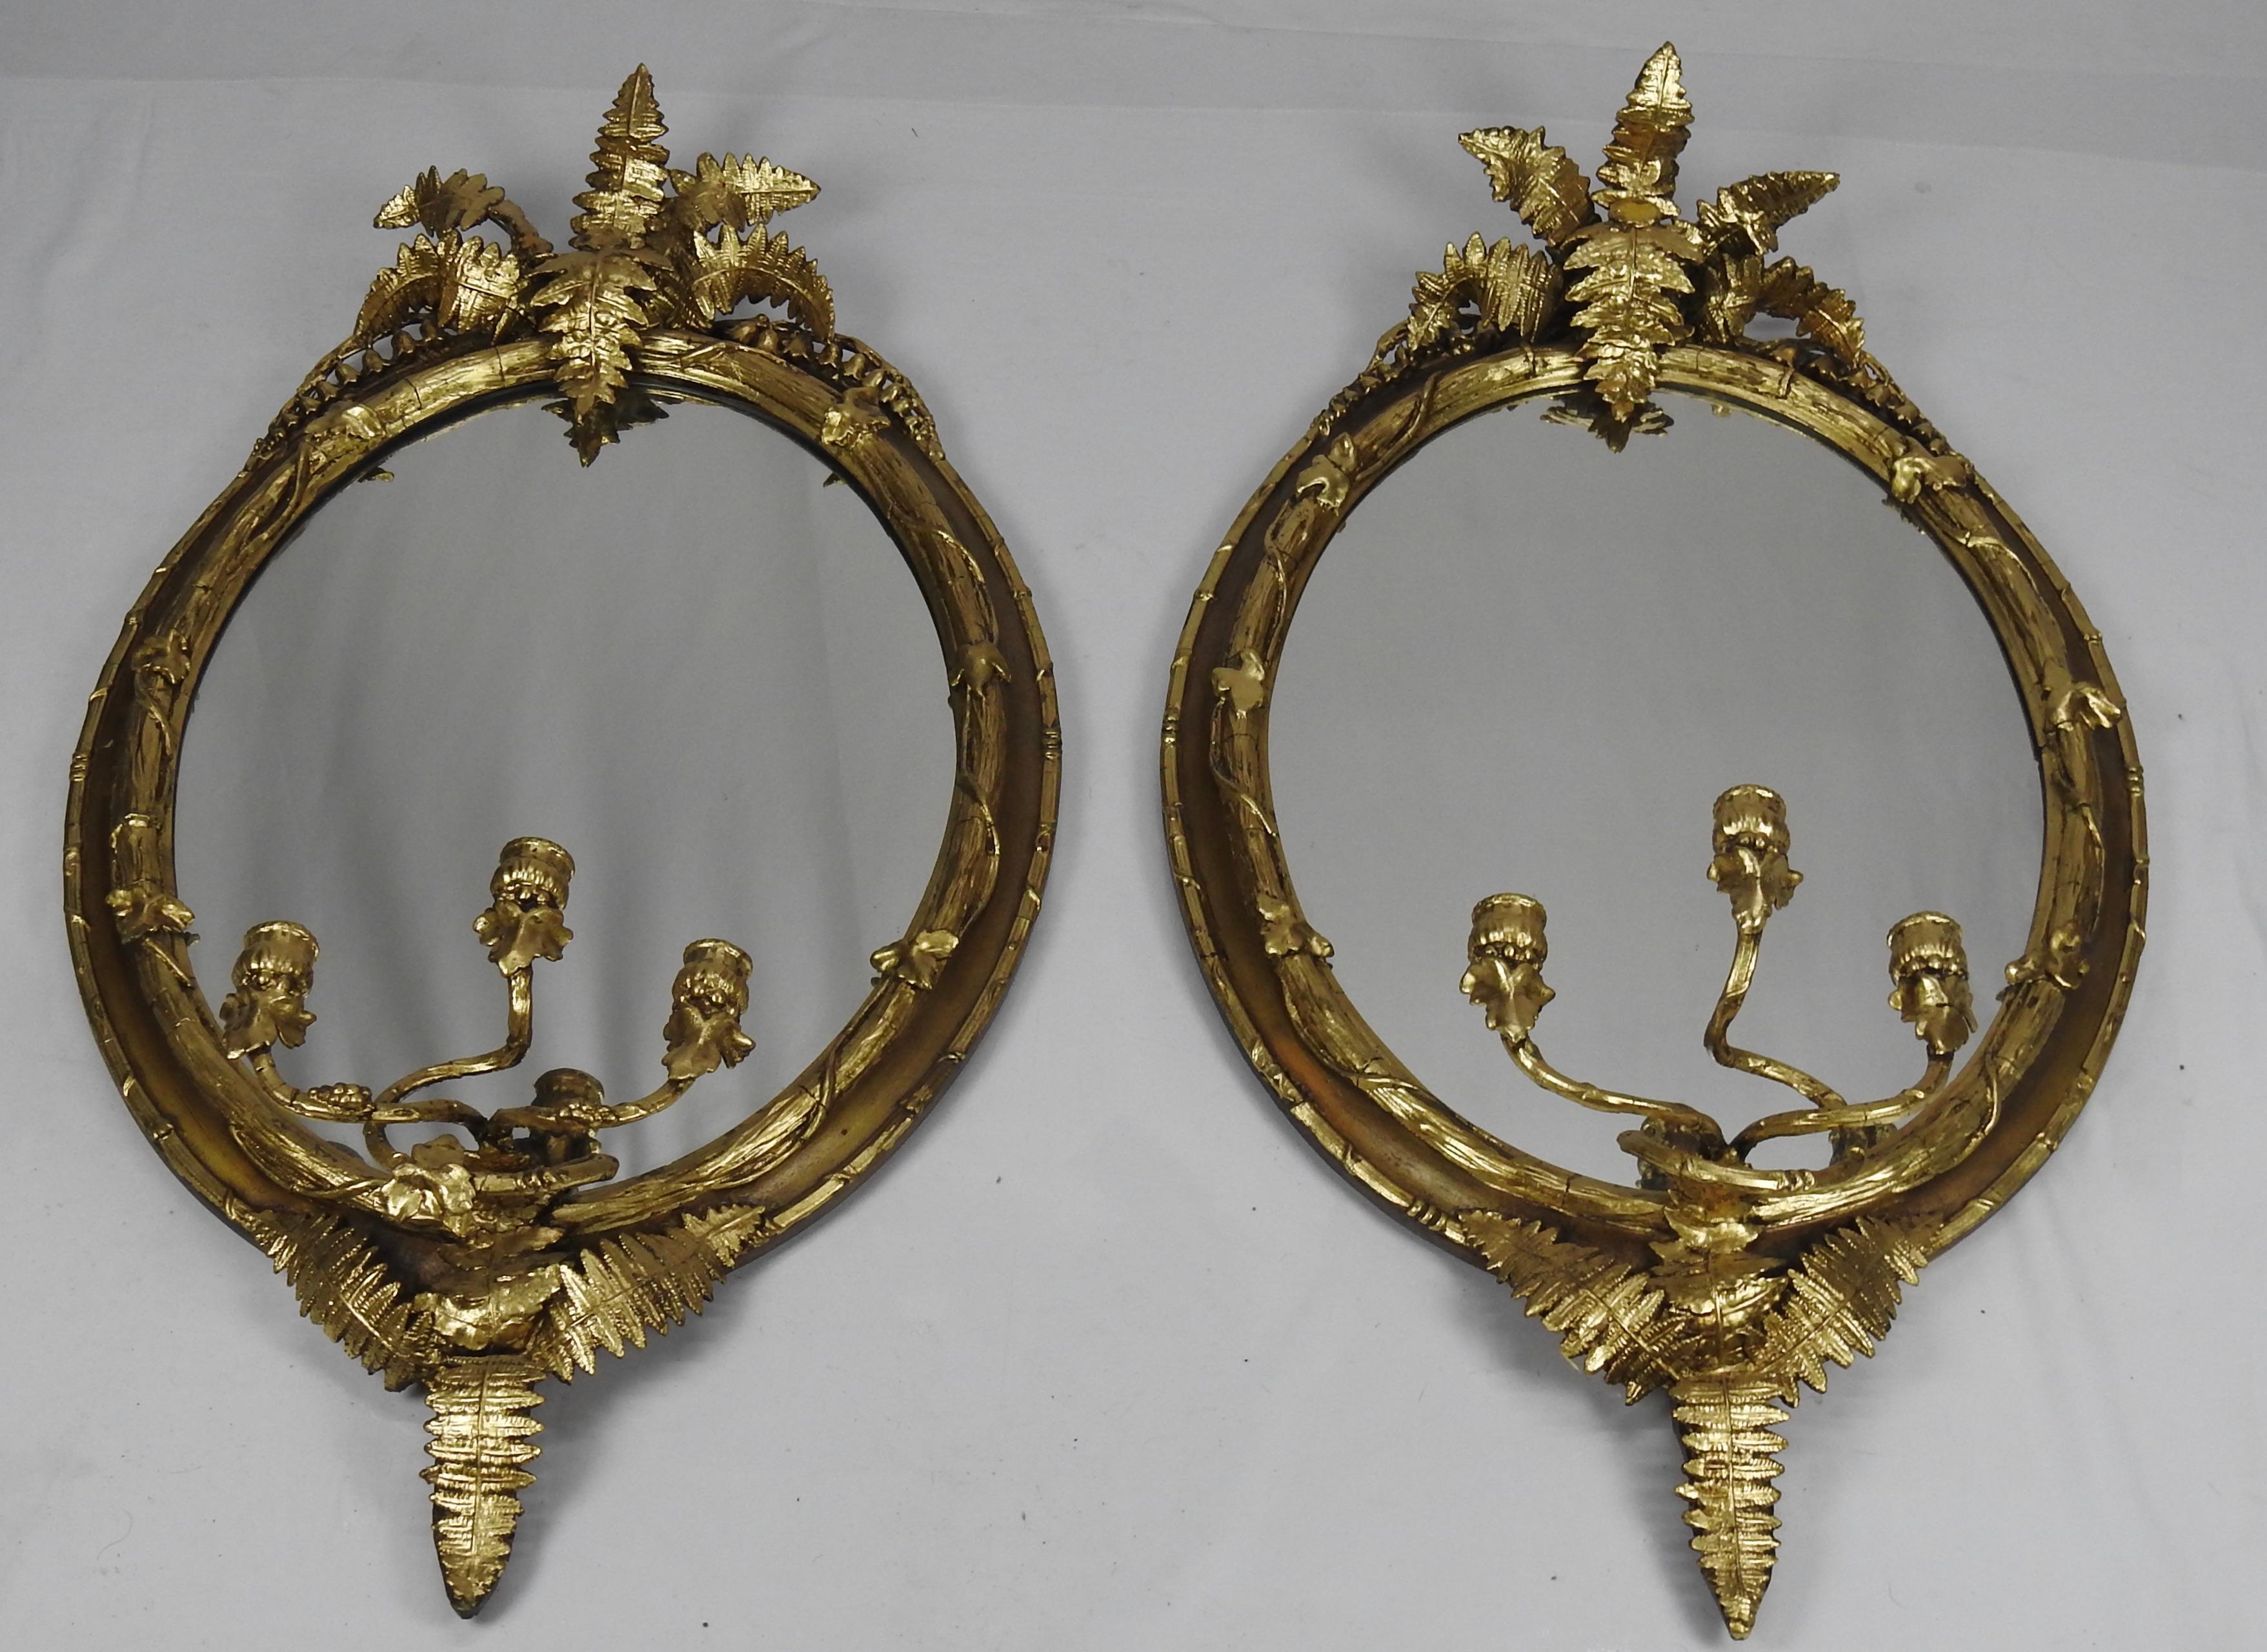 Offering this stunning pair of French fern leaf mirrors. Water gilt highlighting the fern leaf and candleholders.